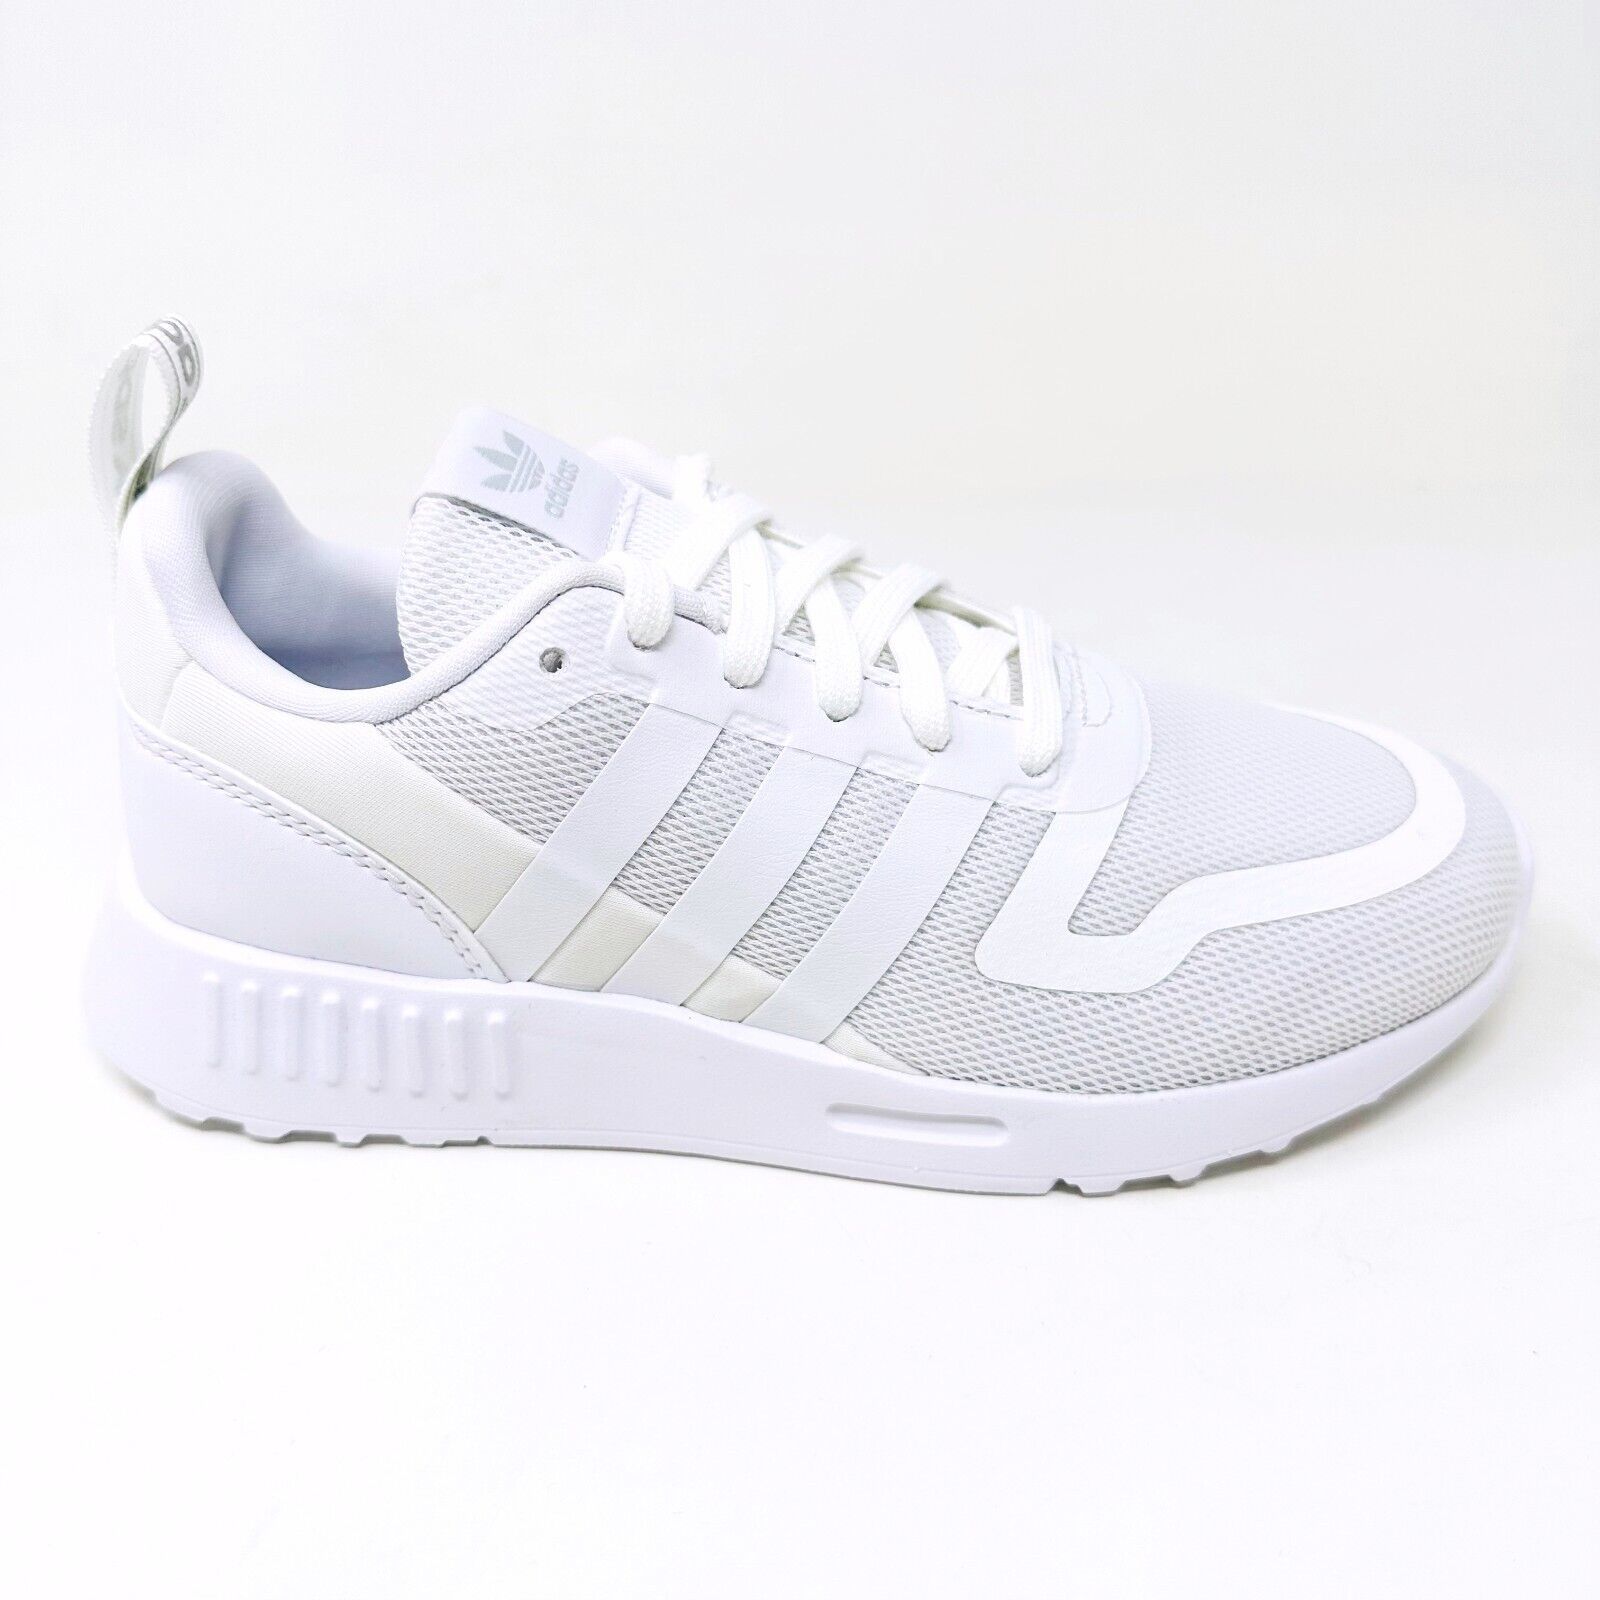 Primary image for Adidas Originals Multix C Triple White Kids Youth Running Sneakers GX8399